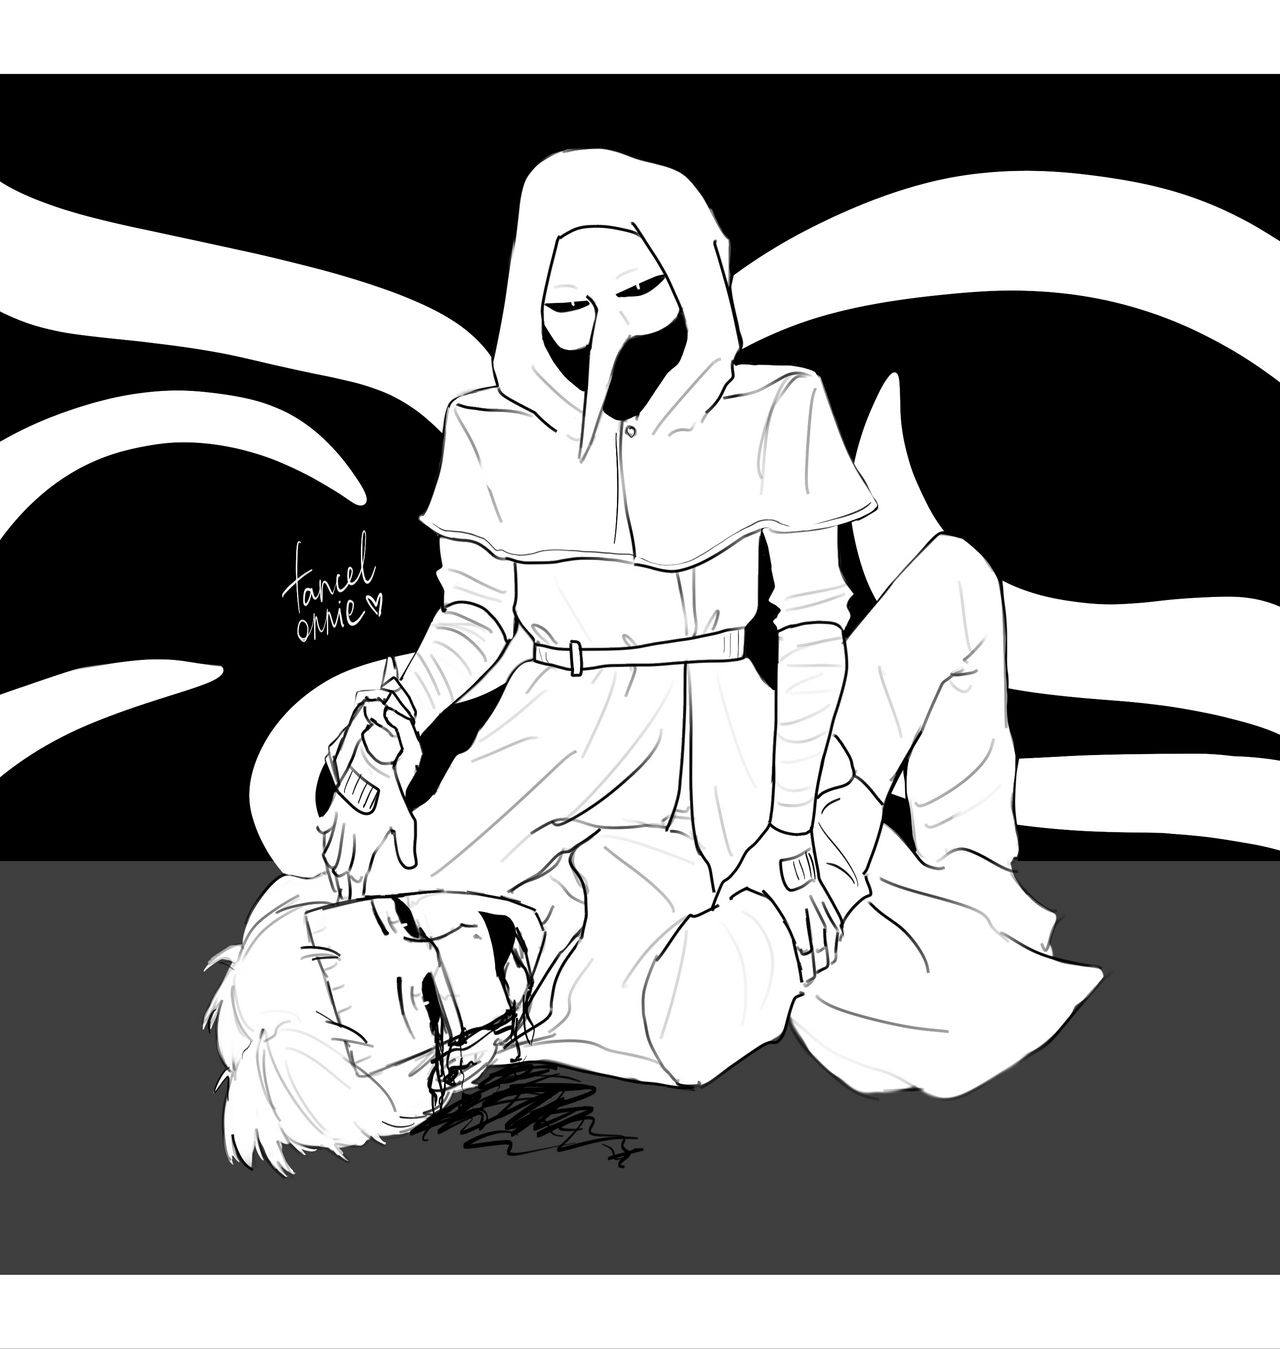 SCP-035 And SCP-049 by UNLuckyONE666 on DeviantArt